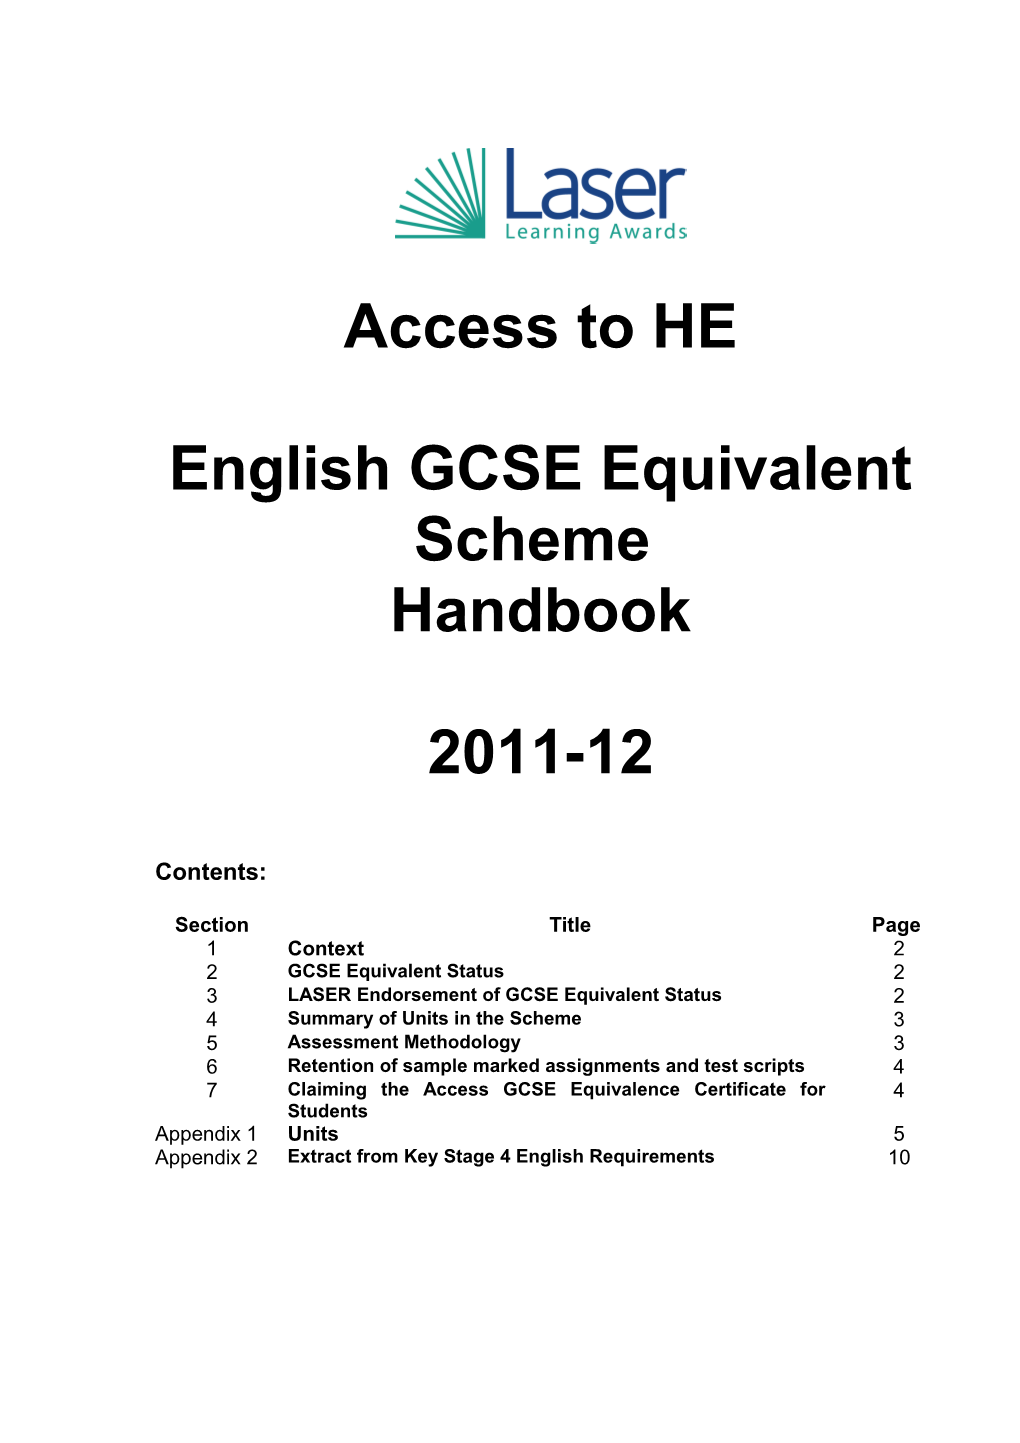 New Access to HE English Equivalent Scheme